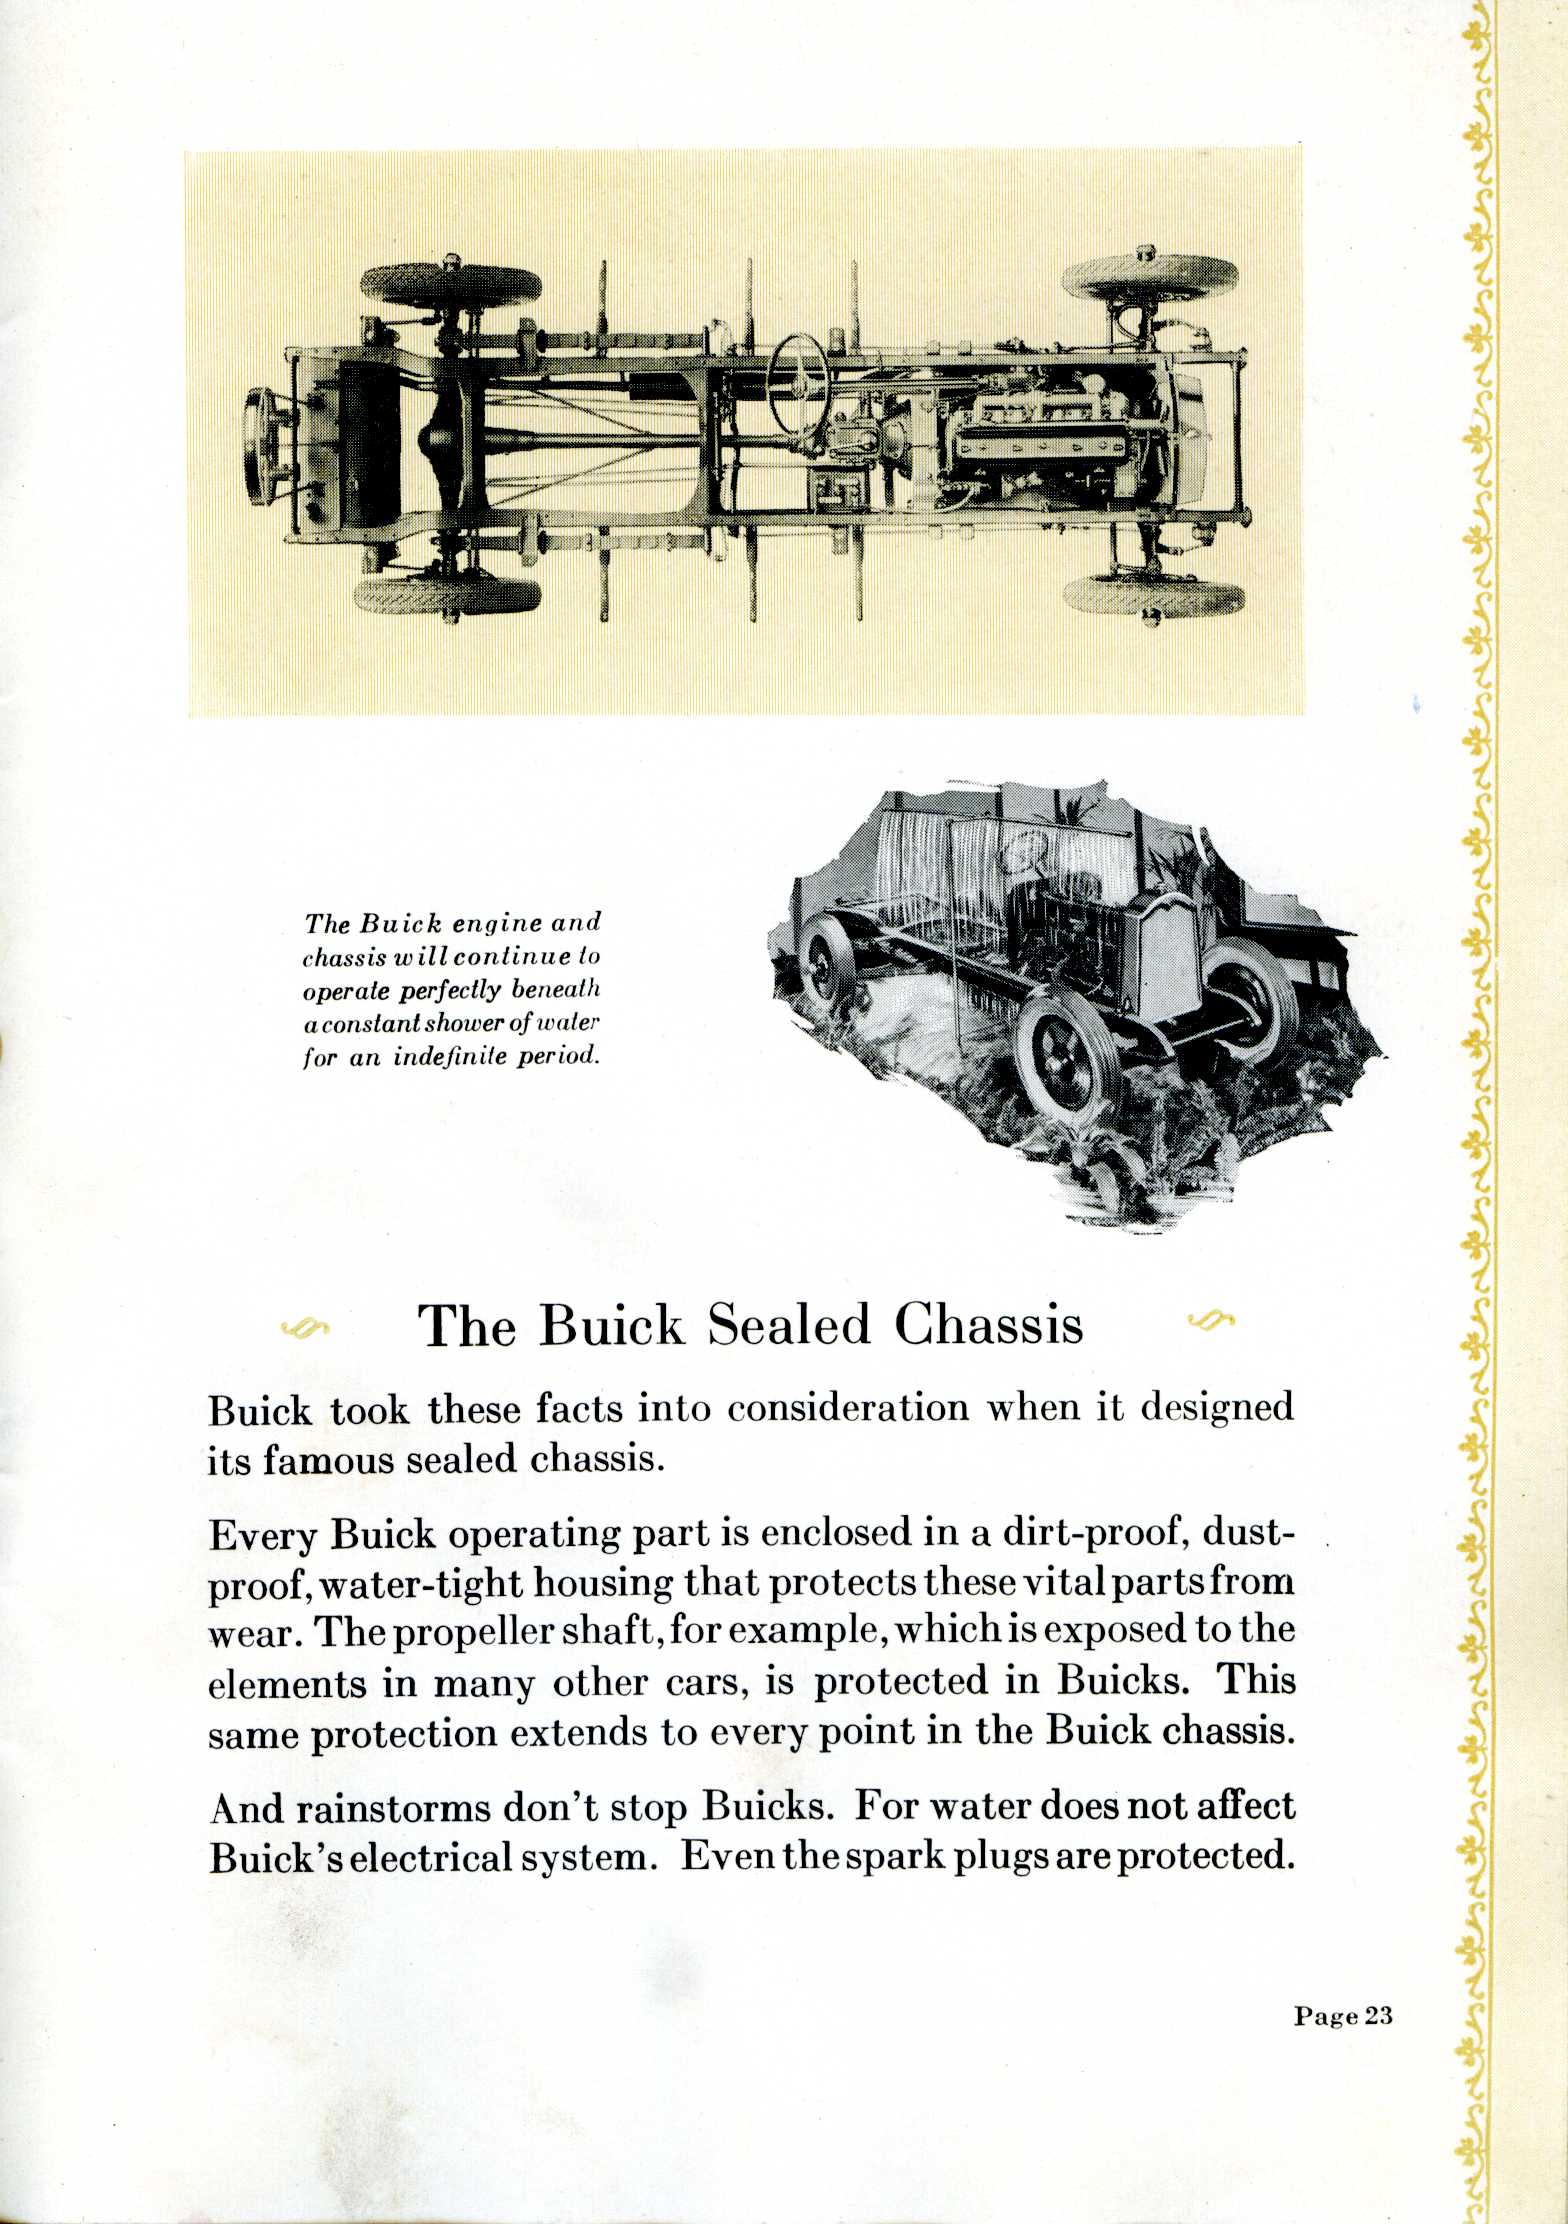 1928 Buick-How to Choose a Motor Car Wisely-23